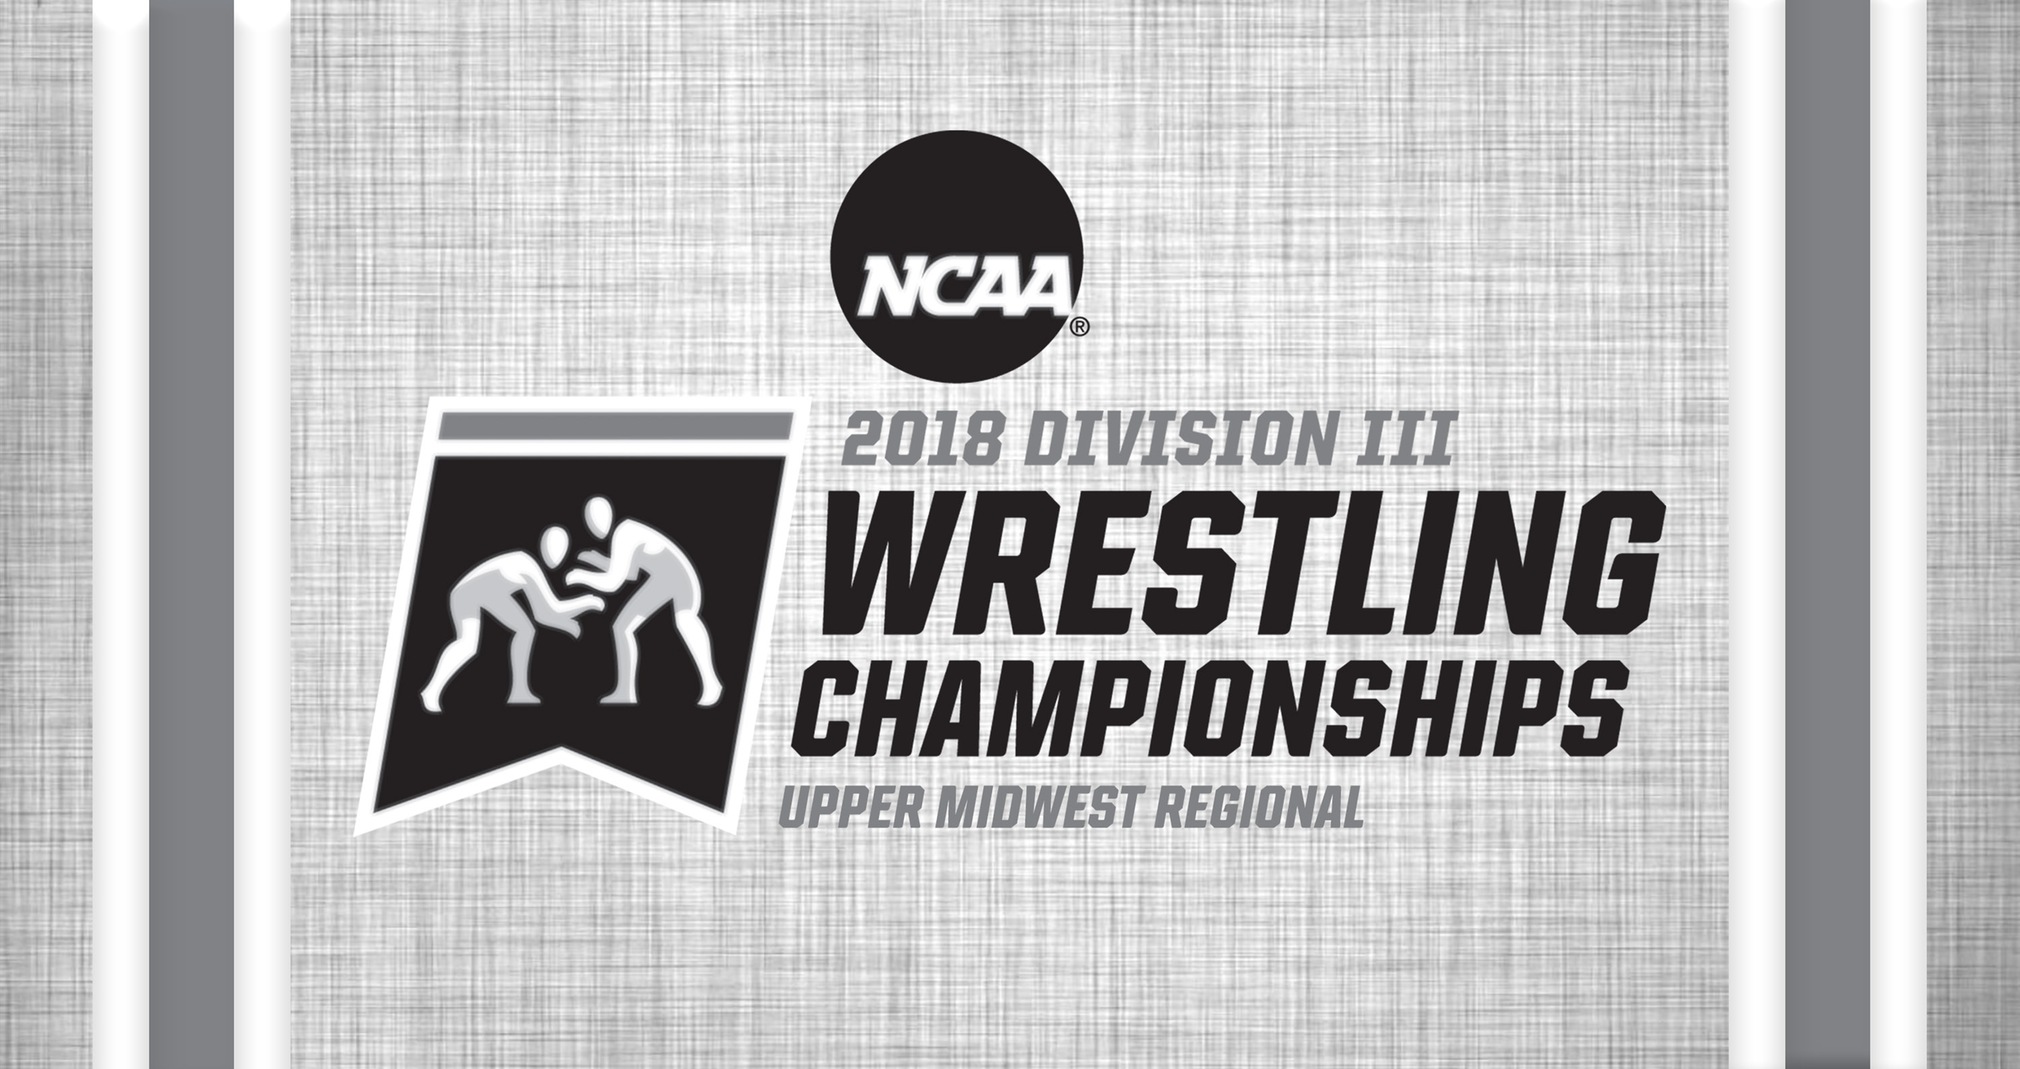 Titans To Wrestle At NCAA Upper Midwest Regional